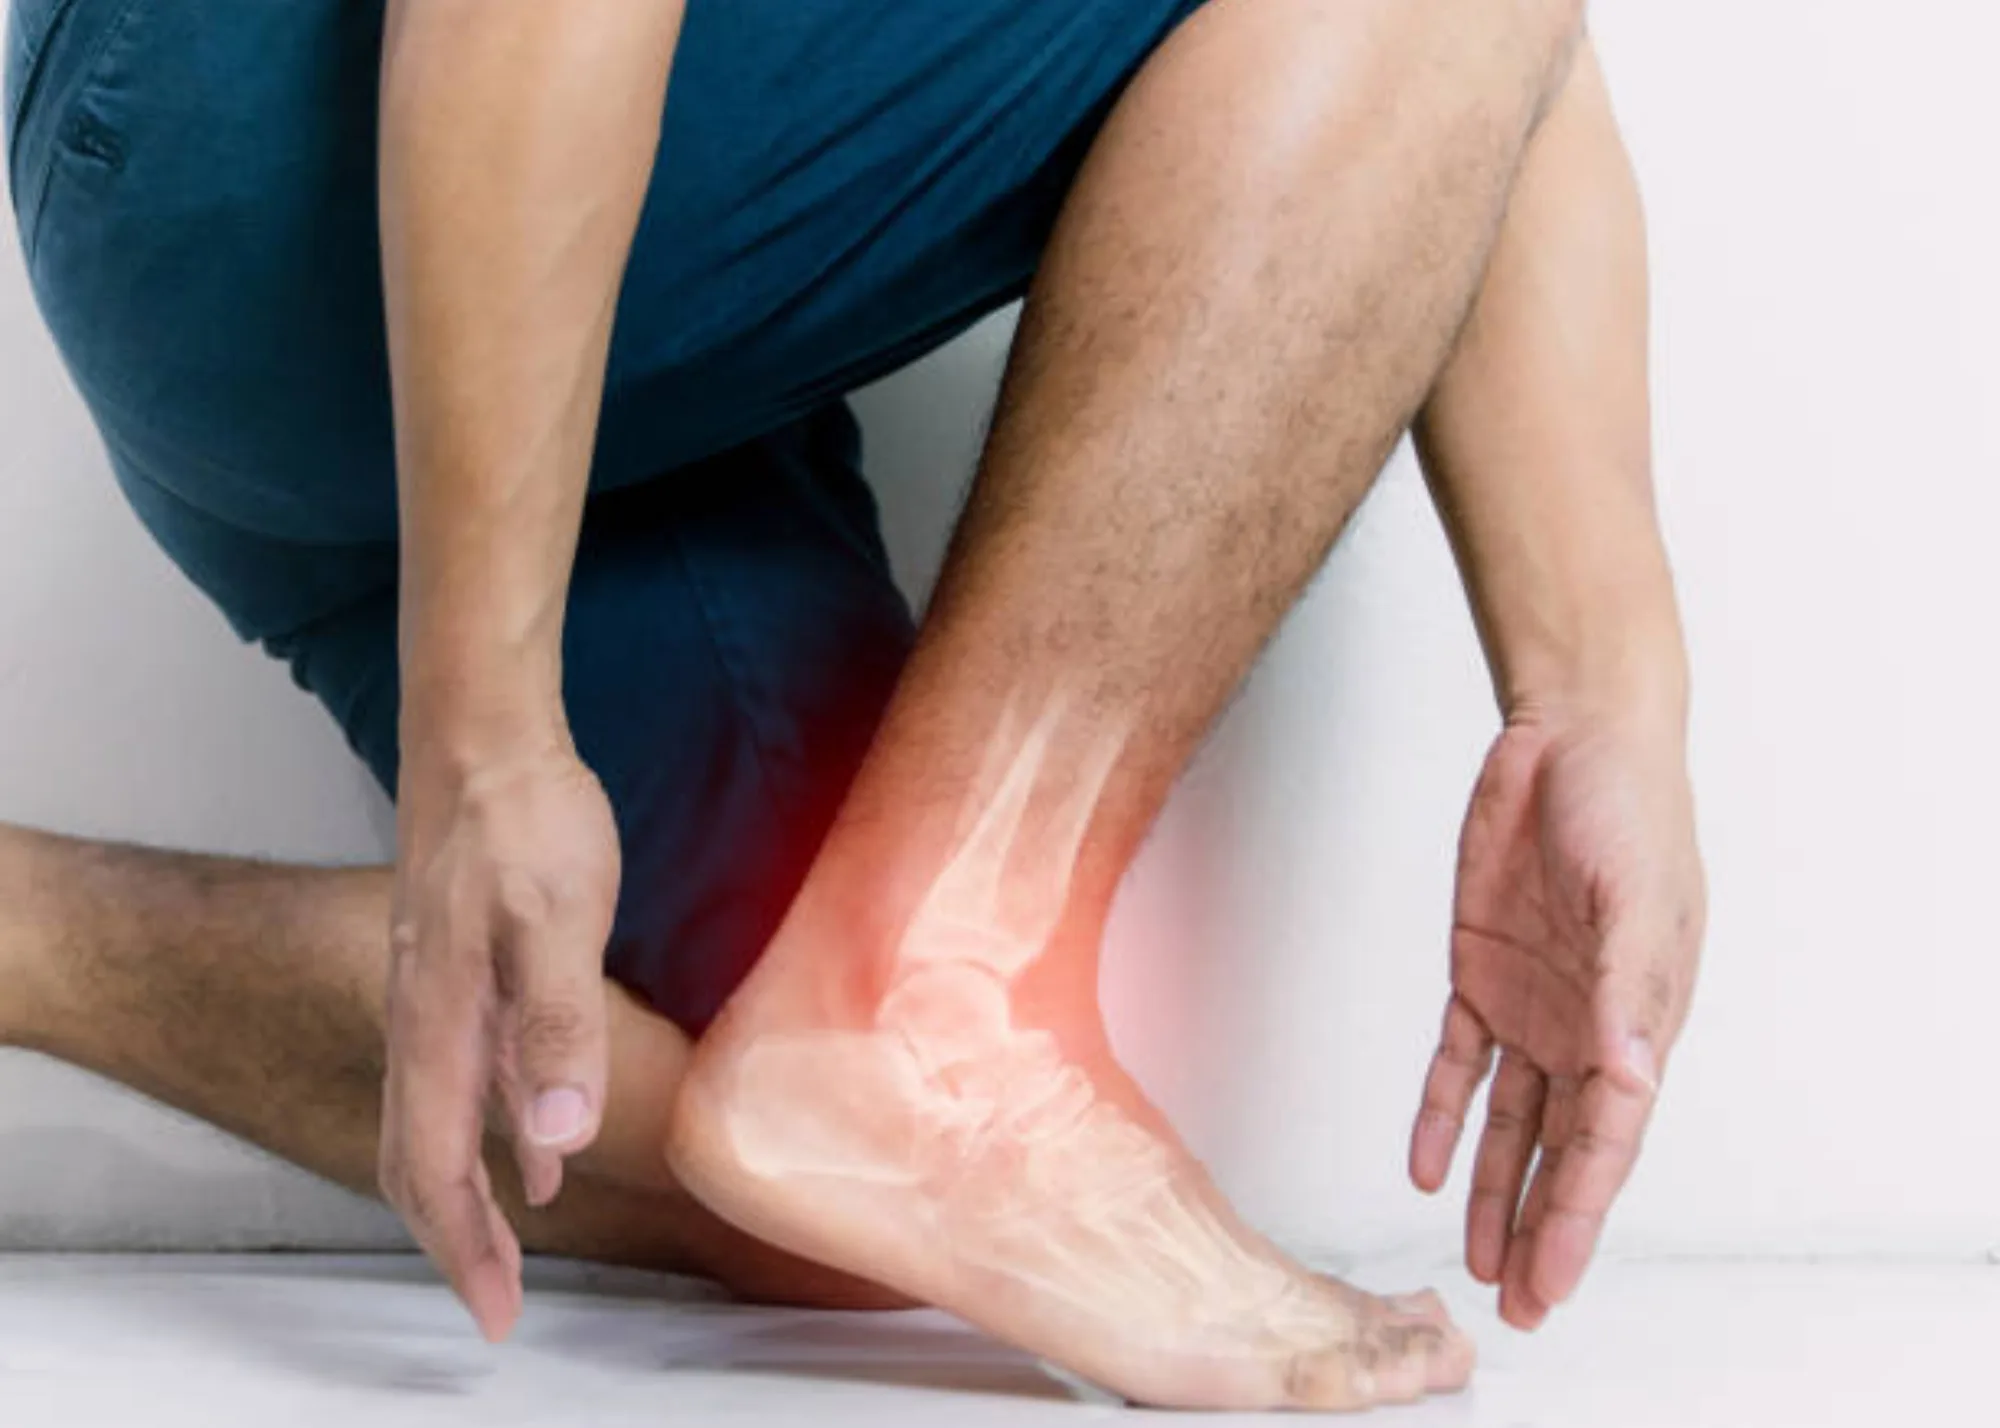 Arthritic Disease support to discuss treatment options with Dr. Christensen to improve your quality of life | North Shore Foot & Ankle Appleton, WI.